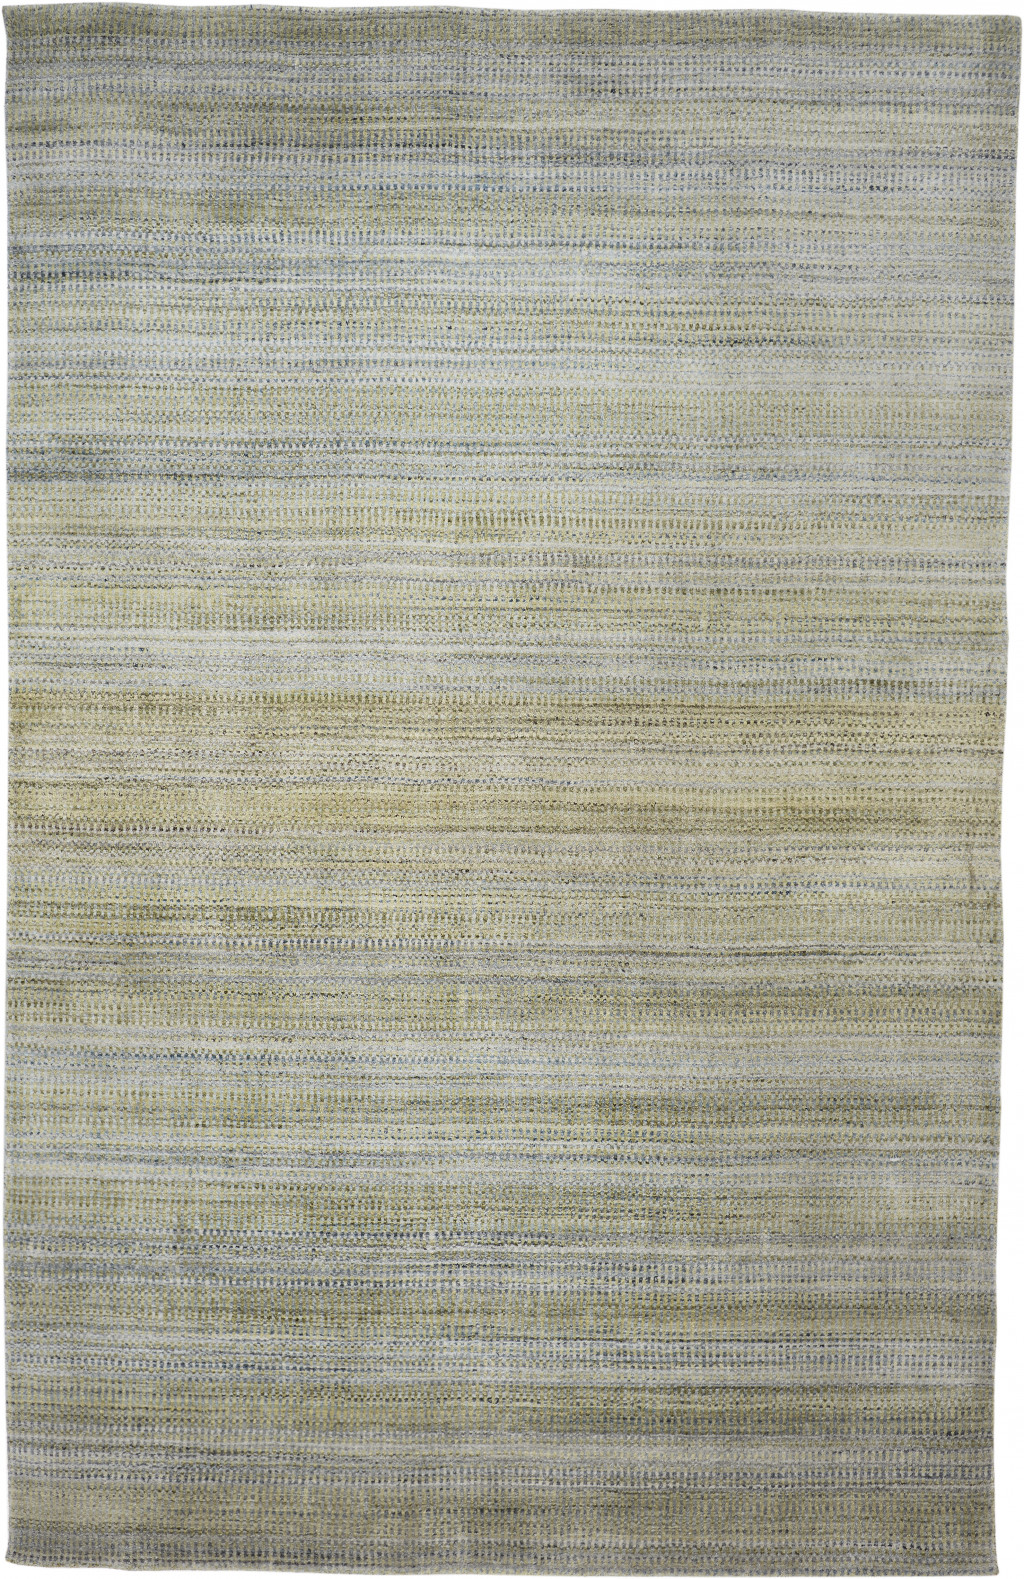 5' X 8' Green Blue And Tan Ombre Hand Woven Area Rug-511723-1